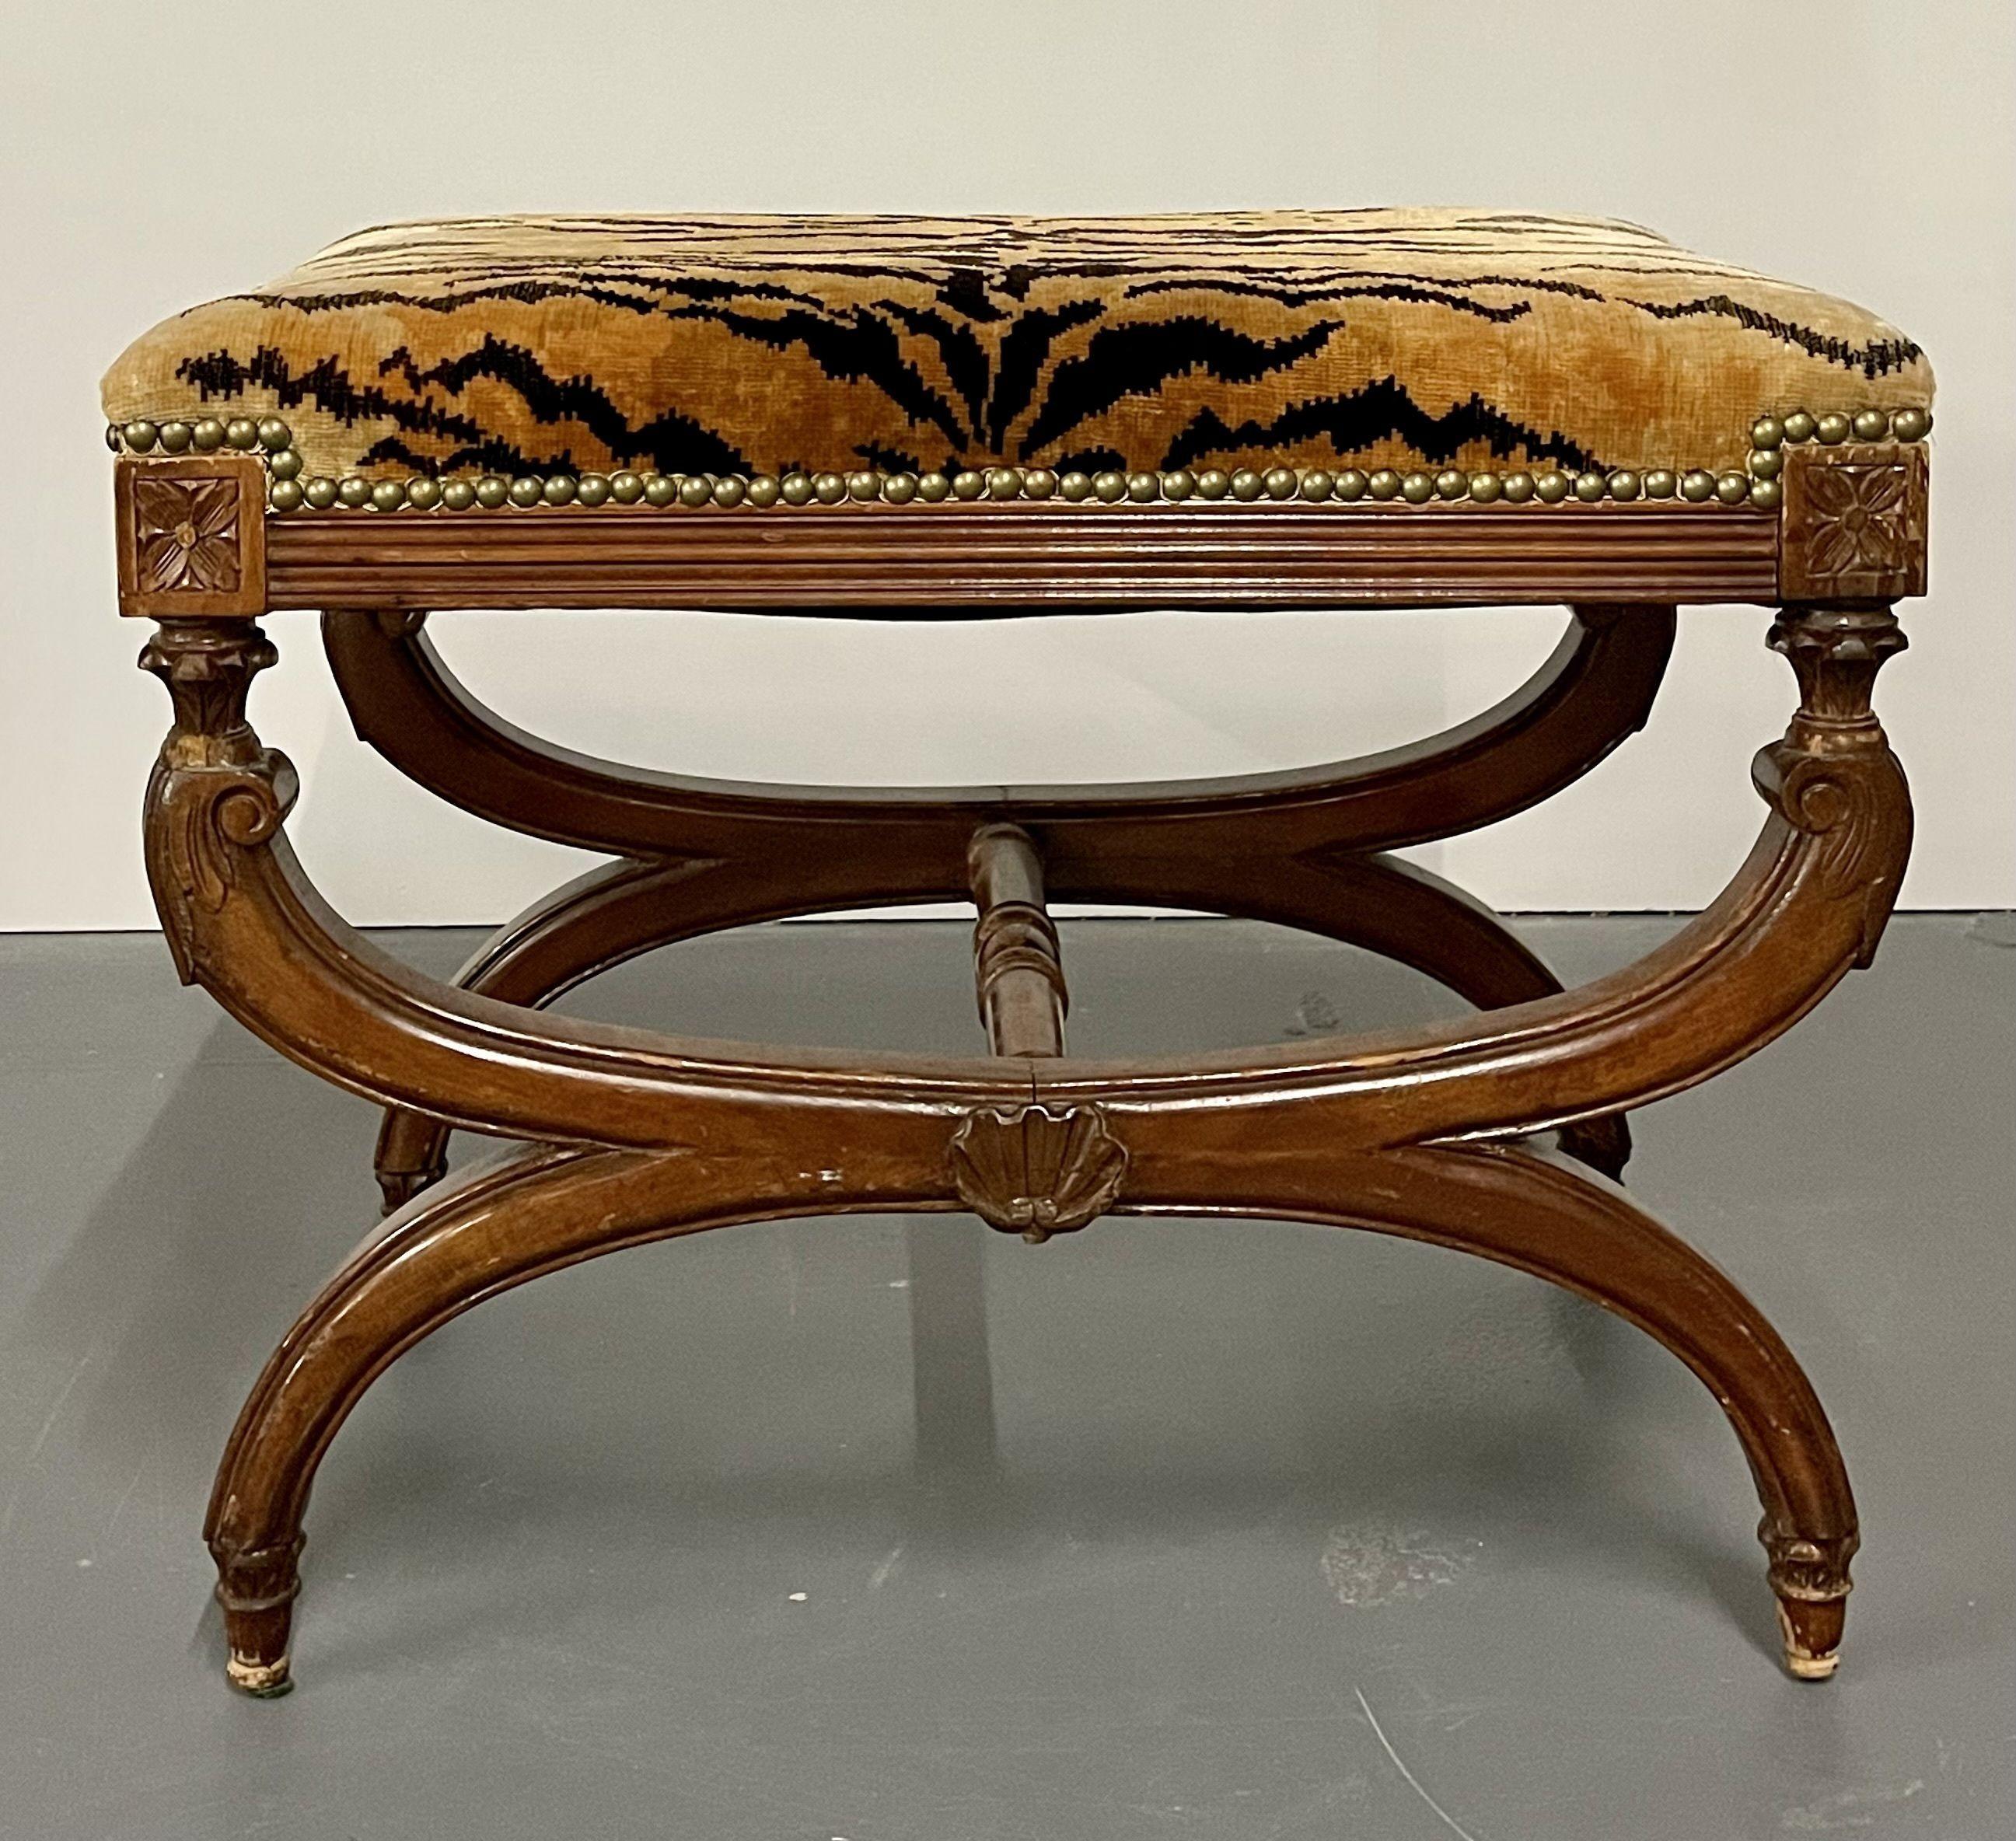 Hollywood Regency style X bench, Footstool, Faux Leopard upholstery

Removed directly from Dr. Shawn Garber's home on the Gold Coast of Long Island. Part of an extensive collection seen only in our showroom.


Provenance:
The Entire Collection